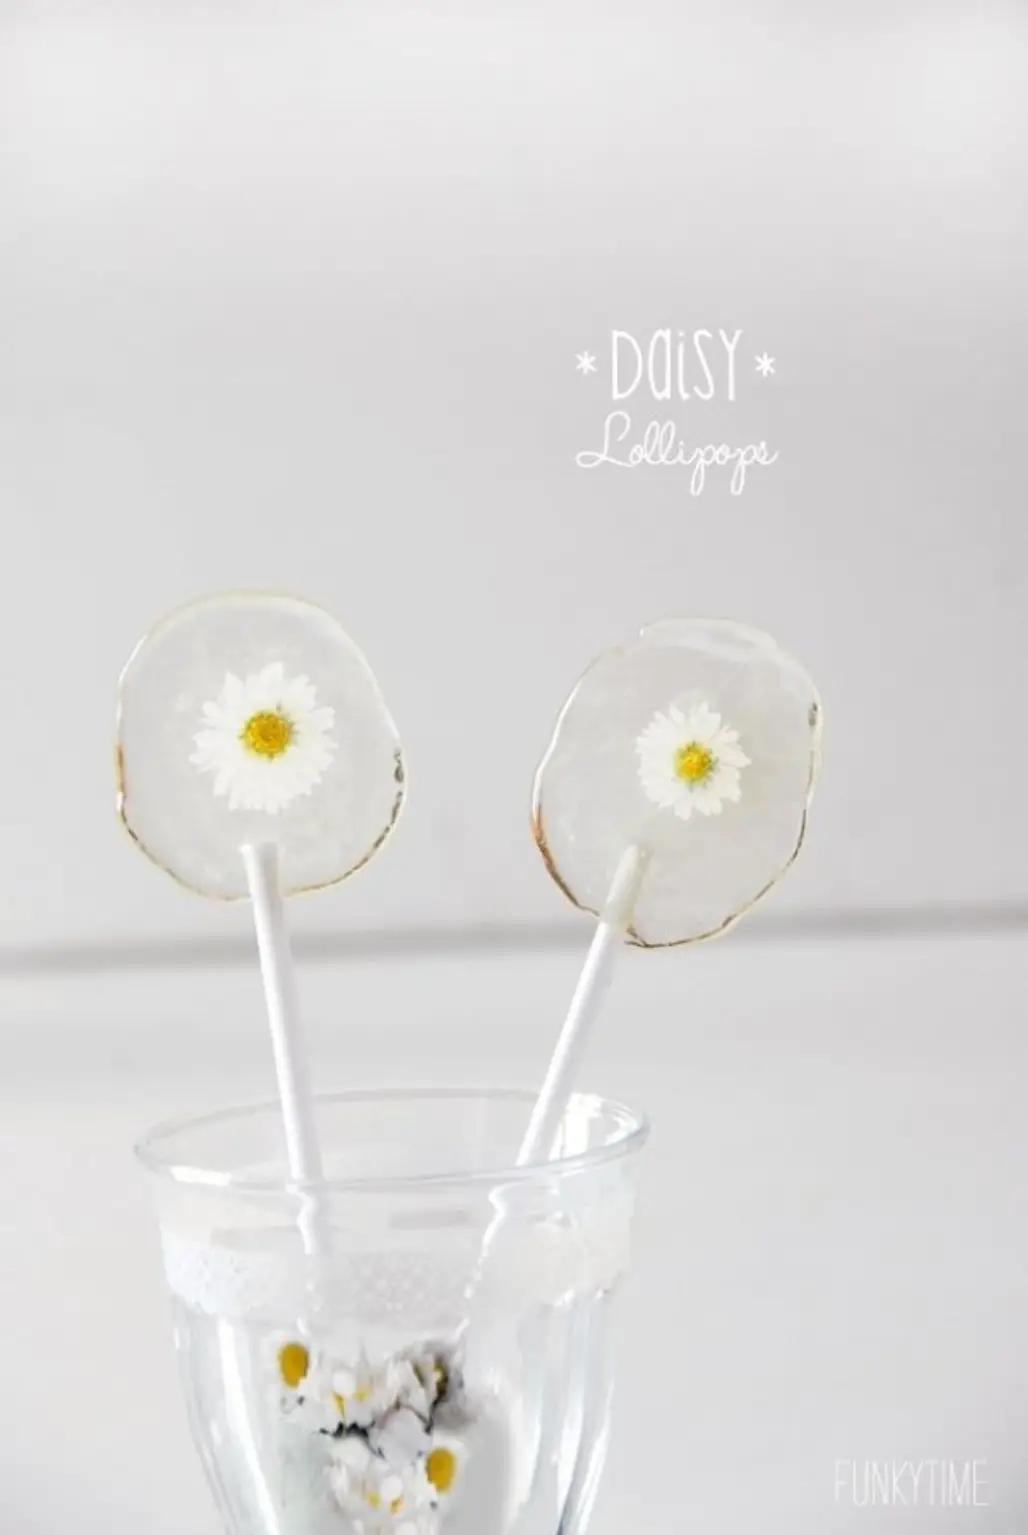 Lollipops with Real Daisies